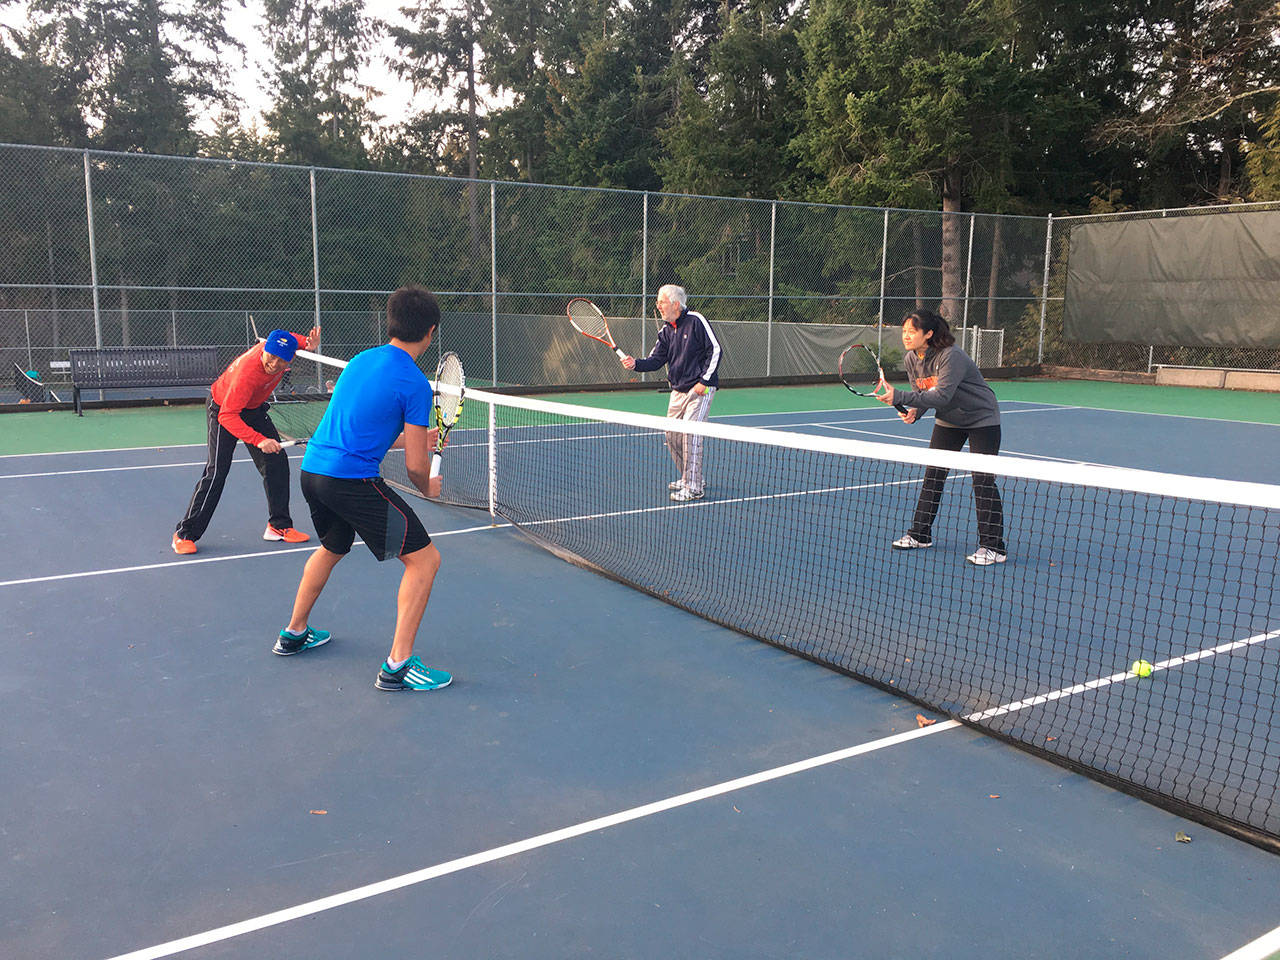 Islanders gather for pickleball at the BHS tennis courts.